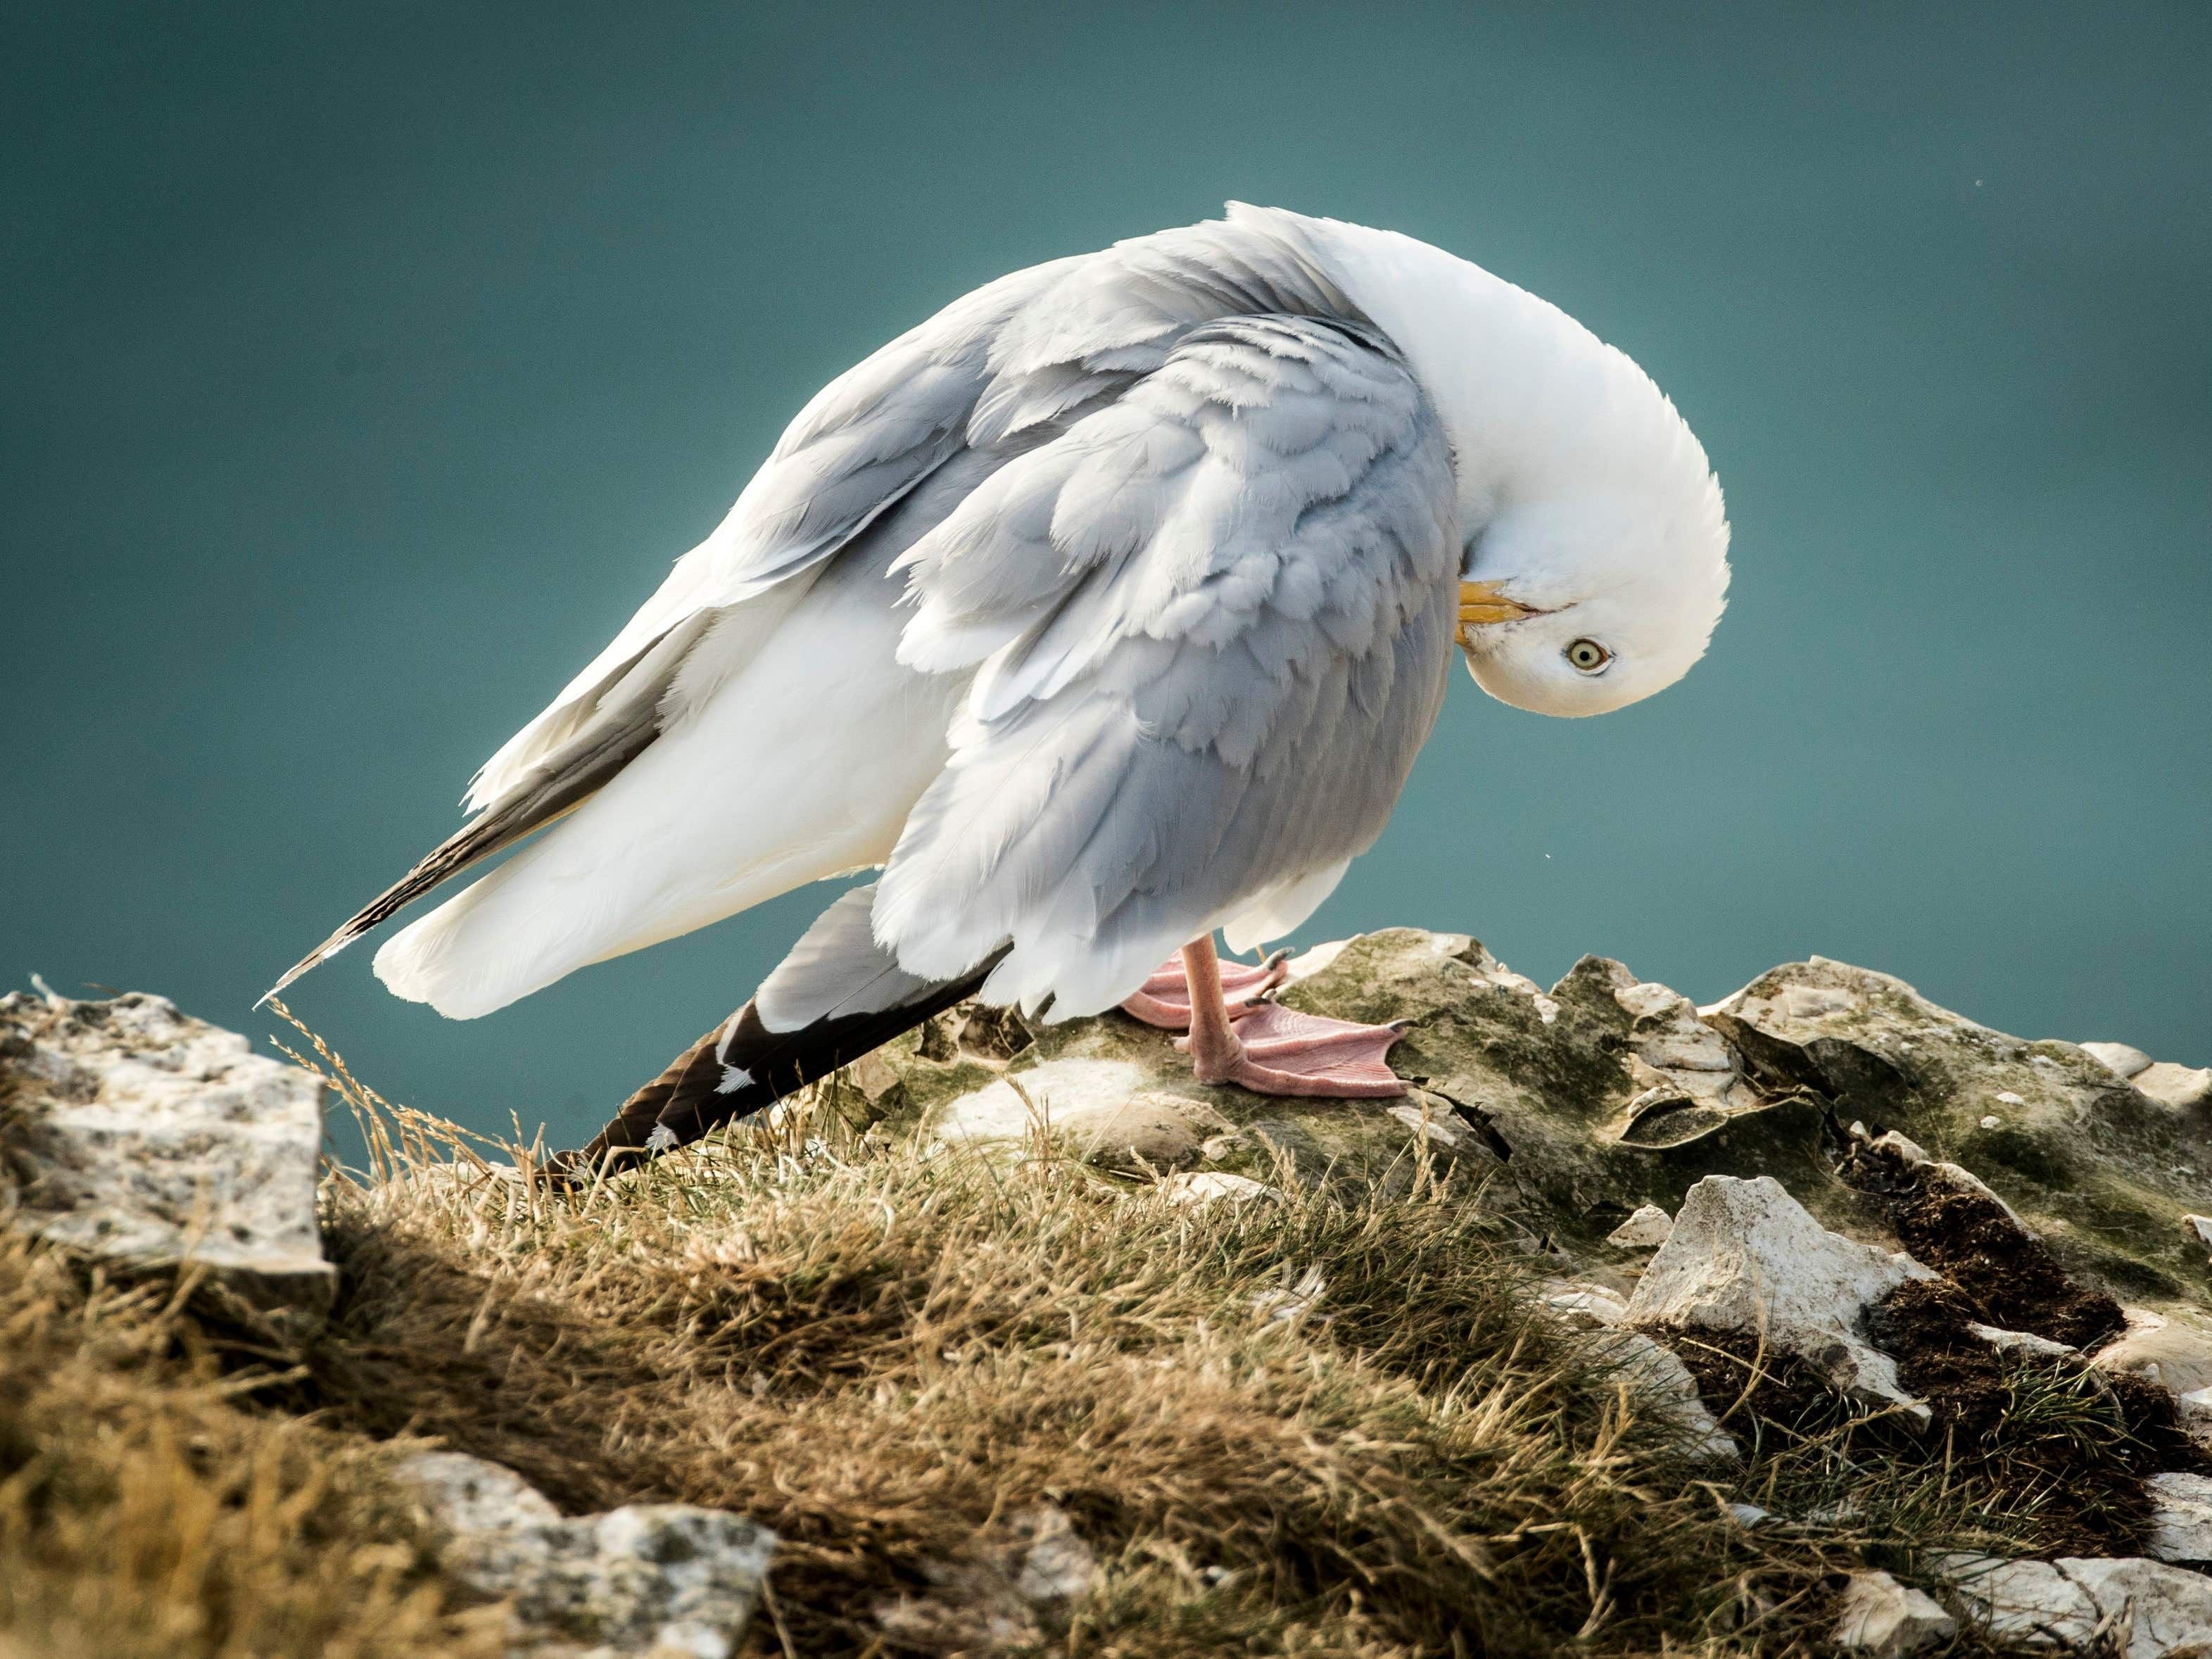 Urban seagulls prefer fish – even when offered human-made foods, study shows